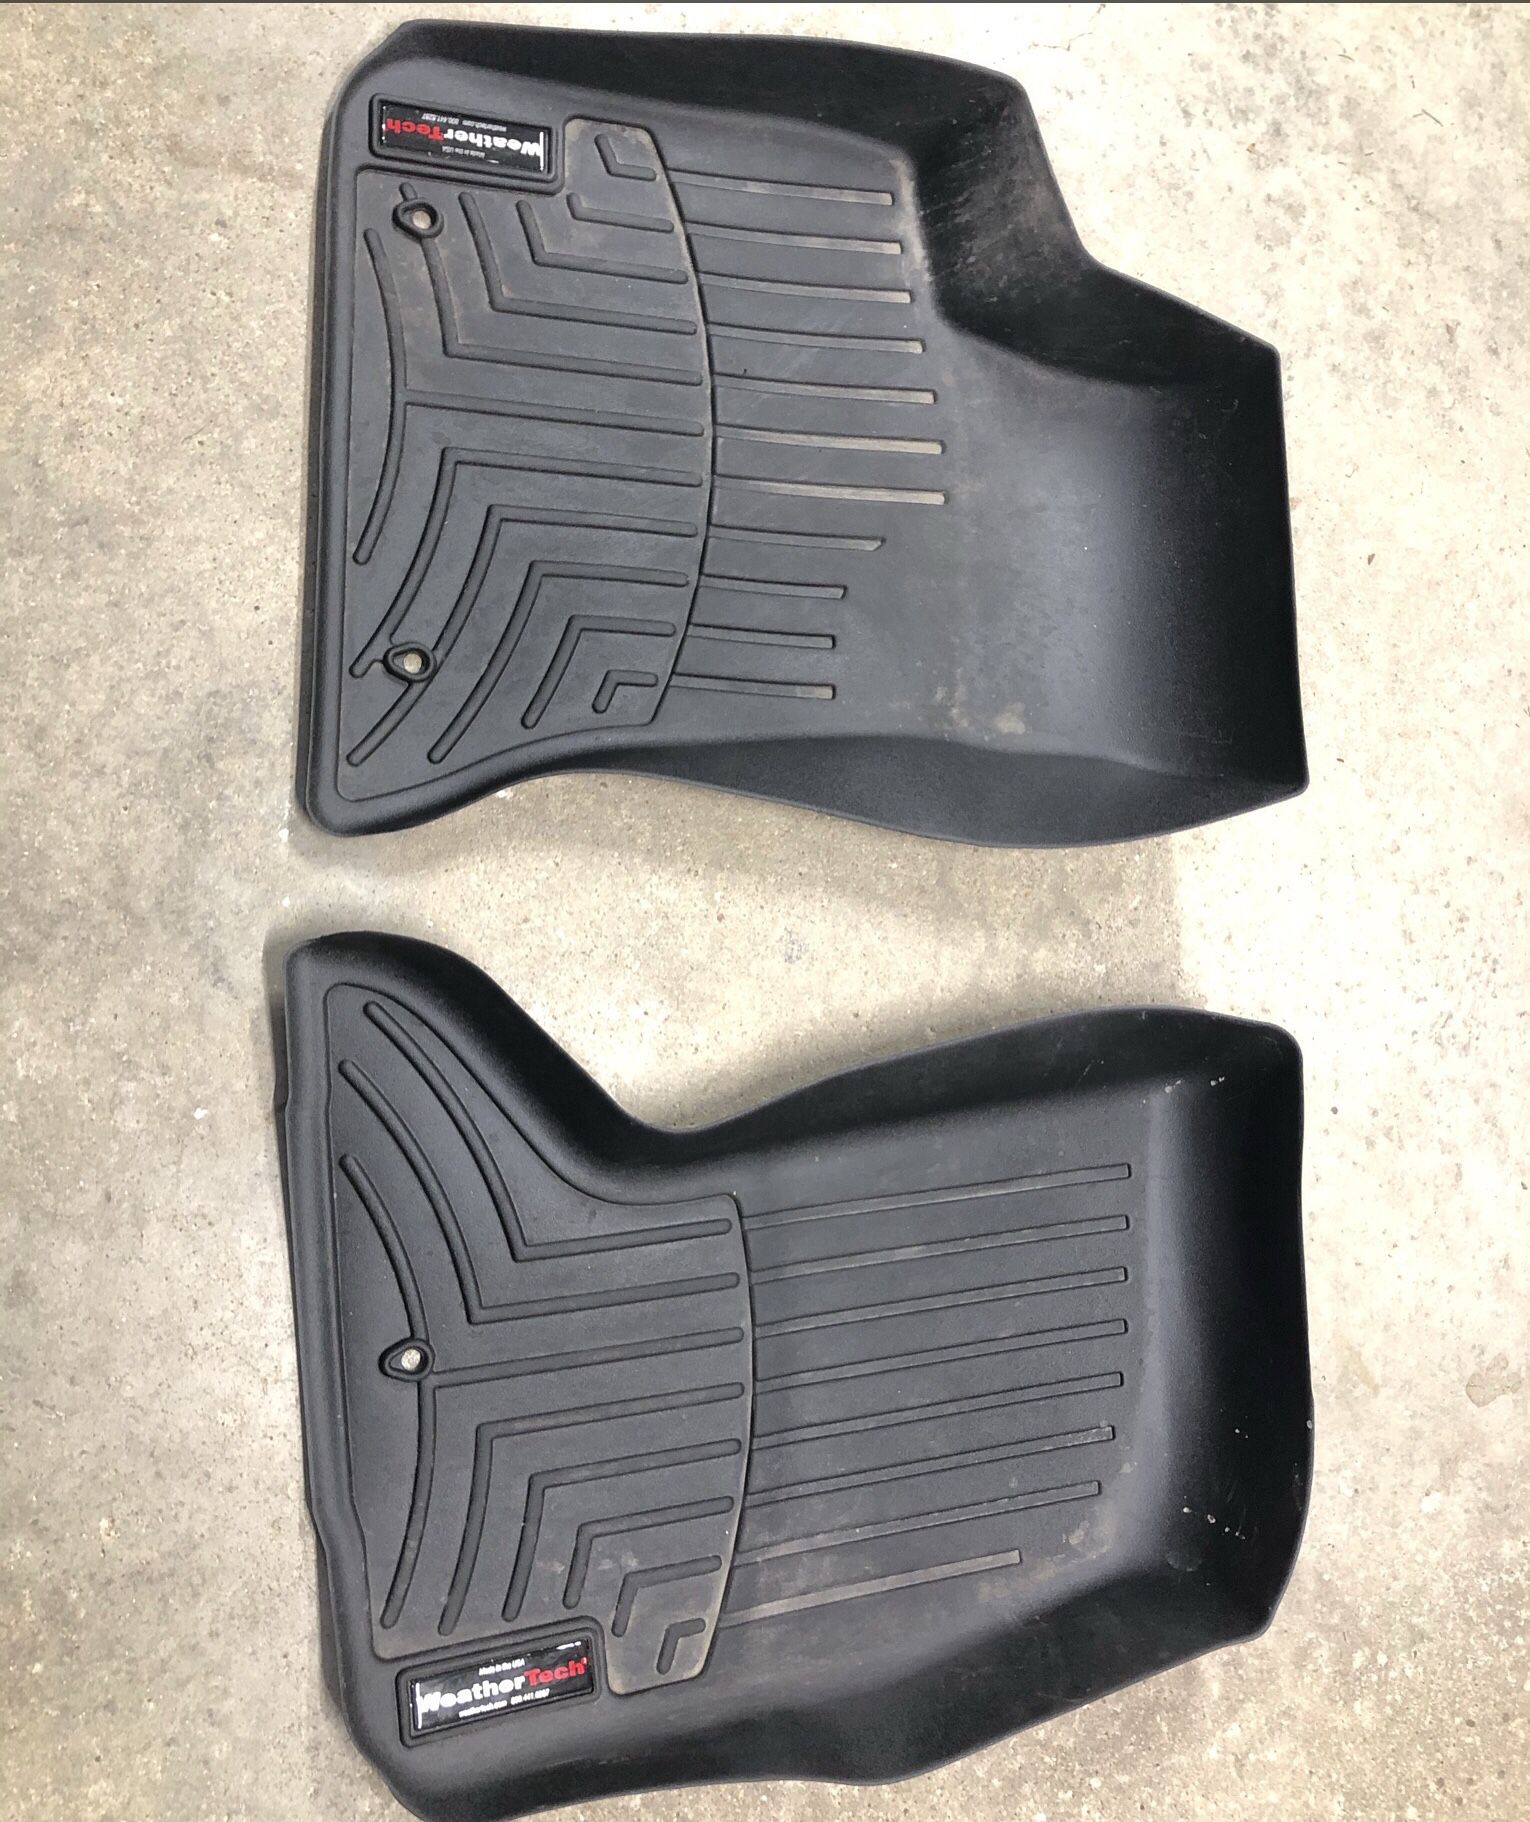 WeatherTech front floor liners for 2018 Chrysler 300 AWD.